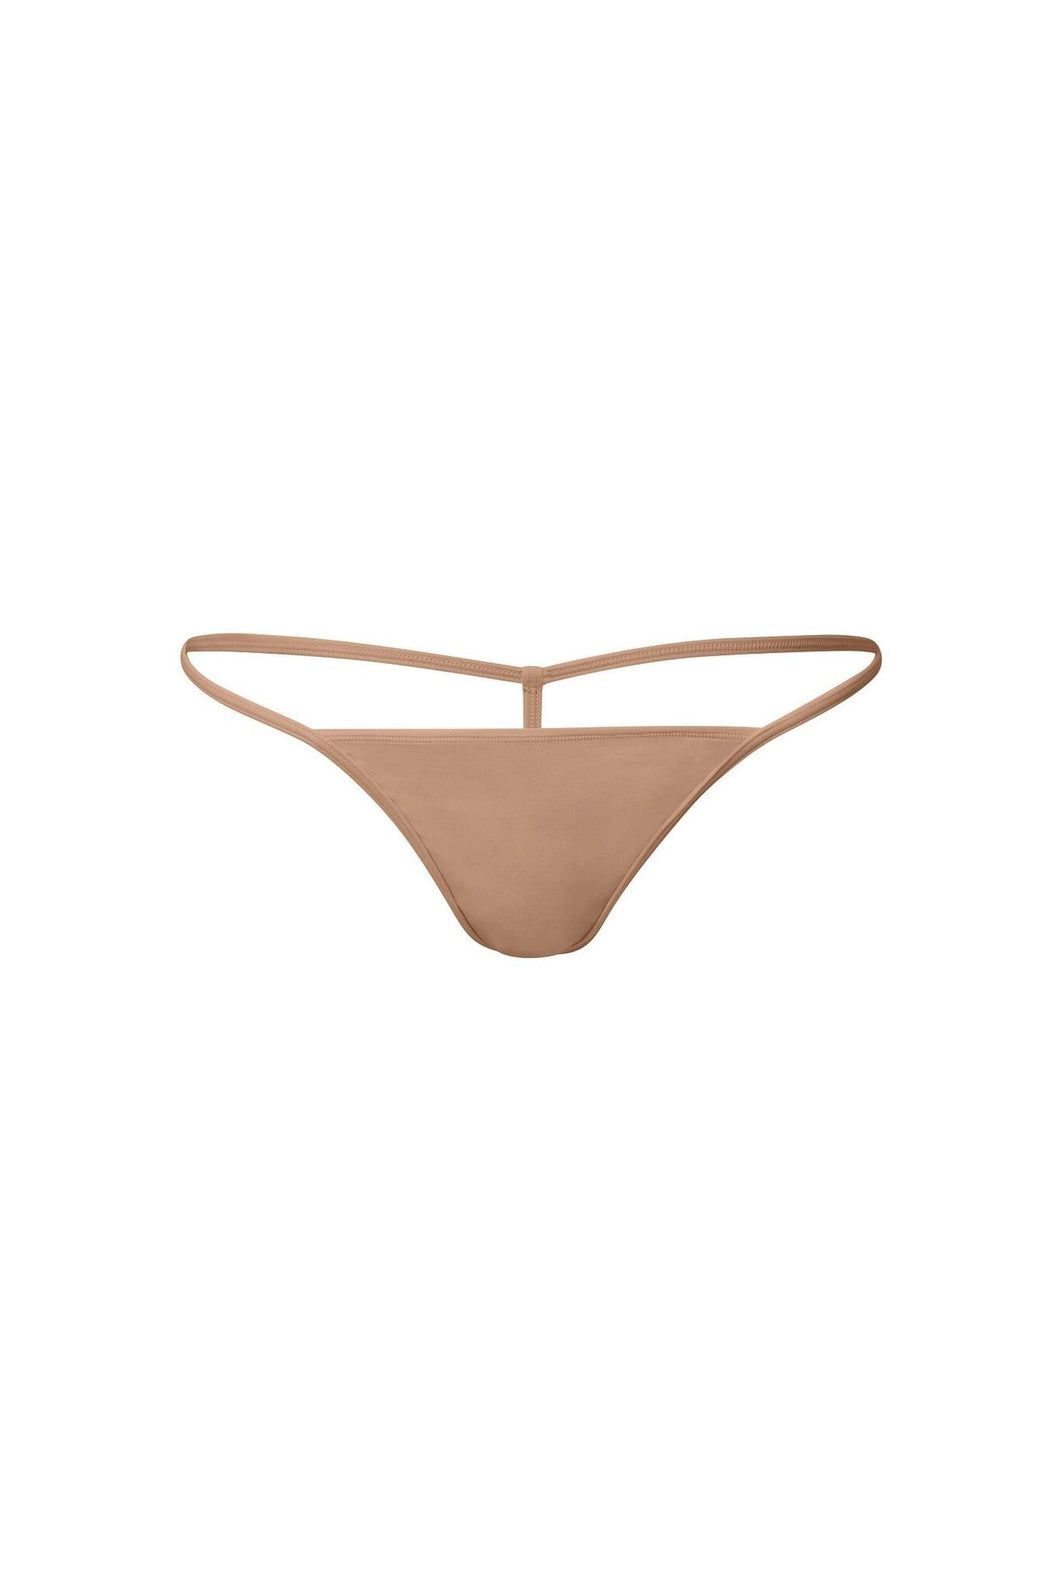 nueskin Irina No-Cut G-String in color Macaroon and shape thong